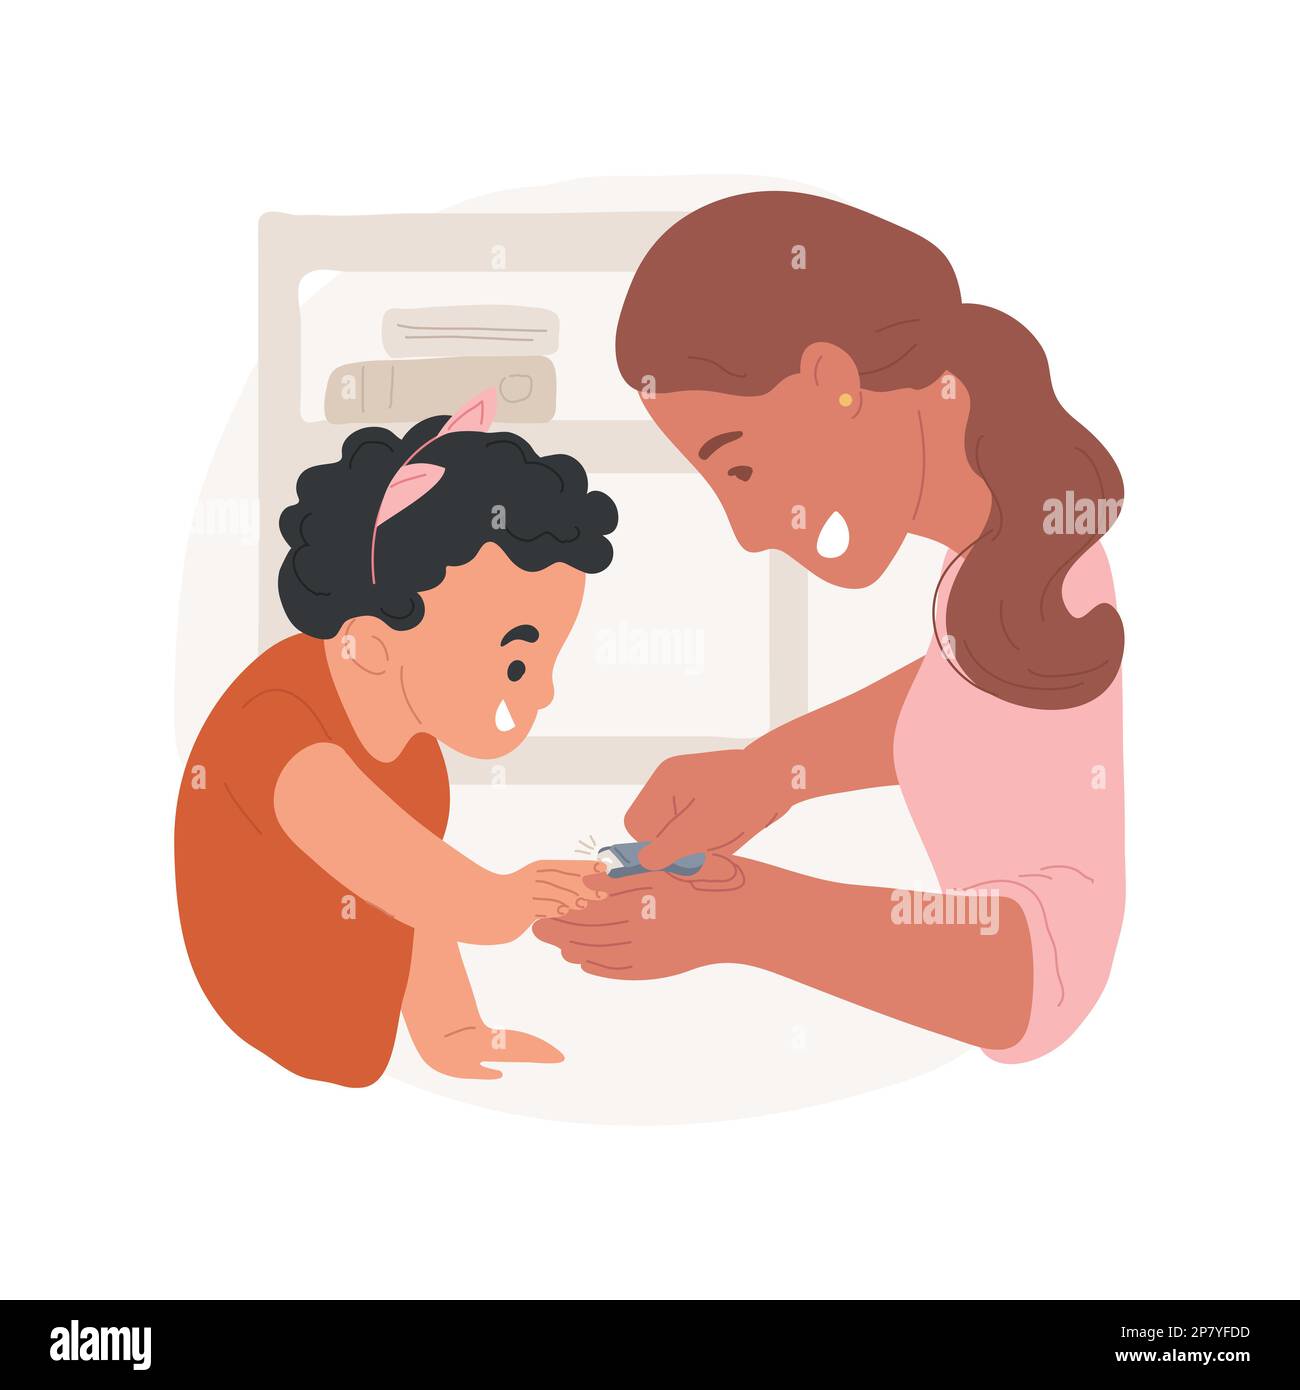 Nails Children: Over 3,183 Royalty-Free Licensable Stock Illustrations &  Drawings | Shutterstock